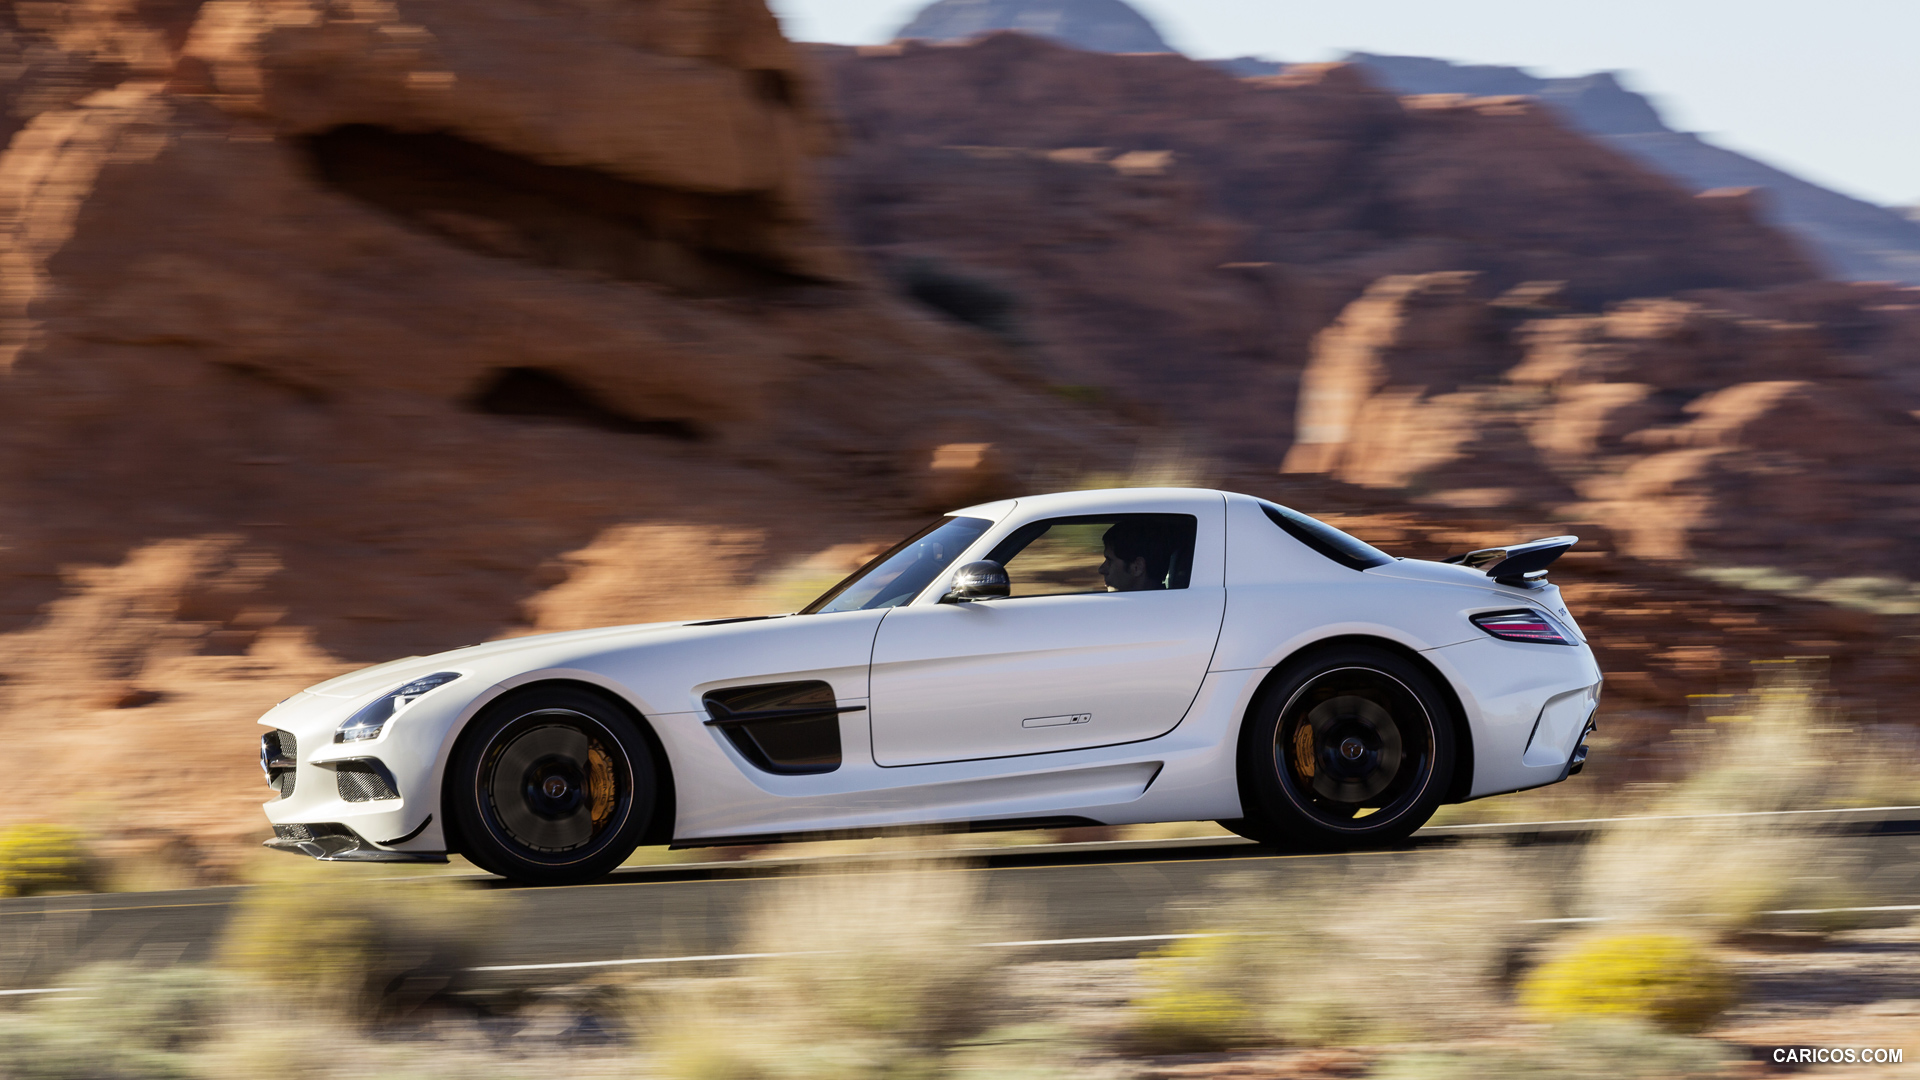 2014 Mercedes-Benz SLS AMG Coupe Black Series White - Side, #7 of 40